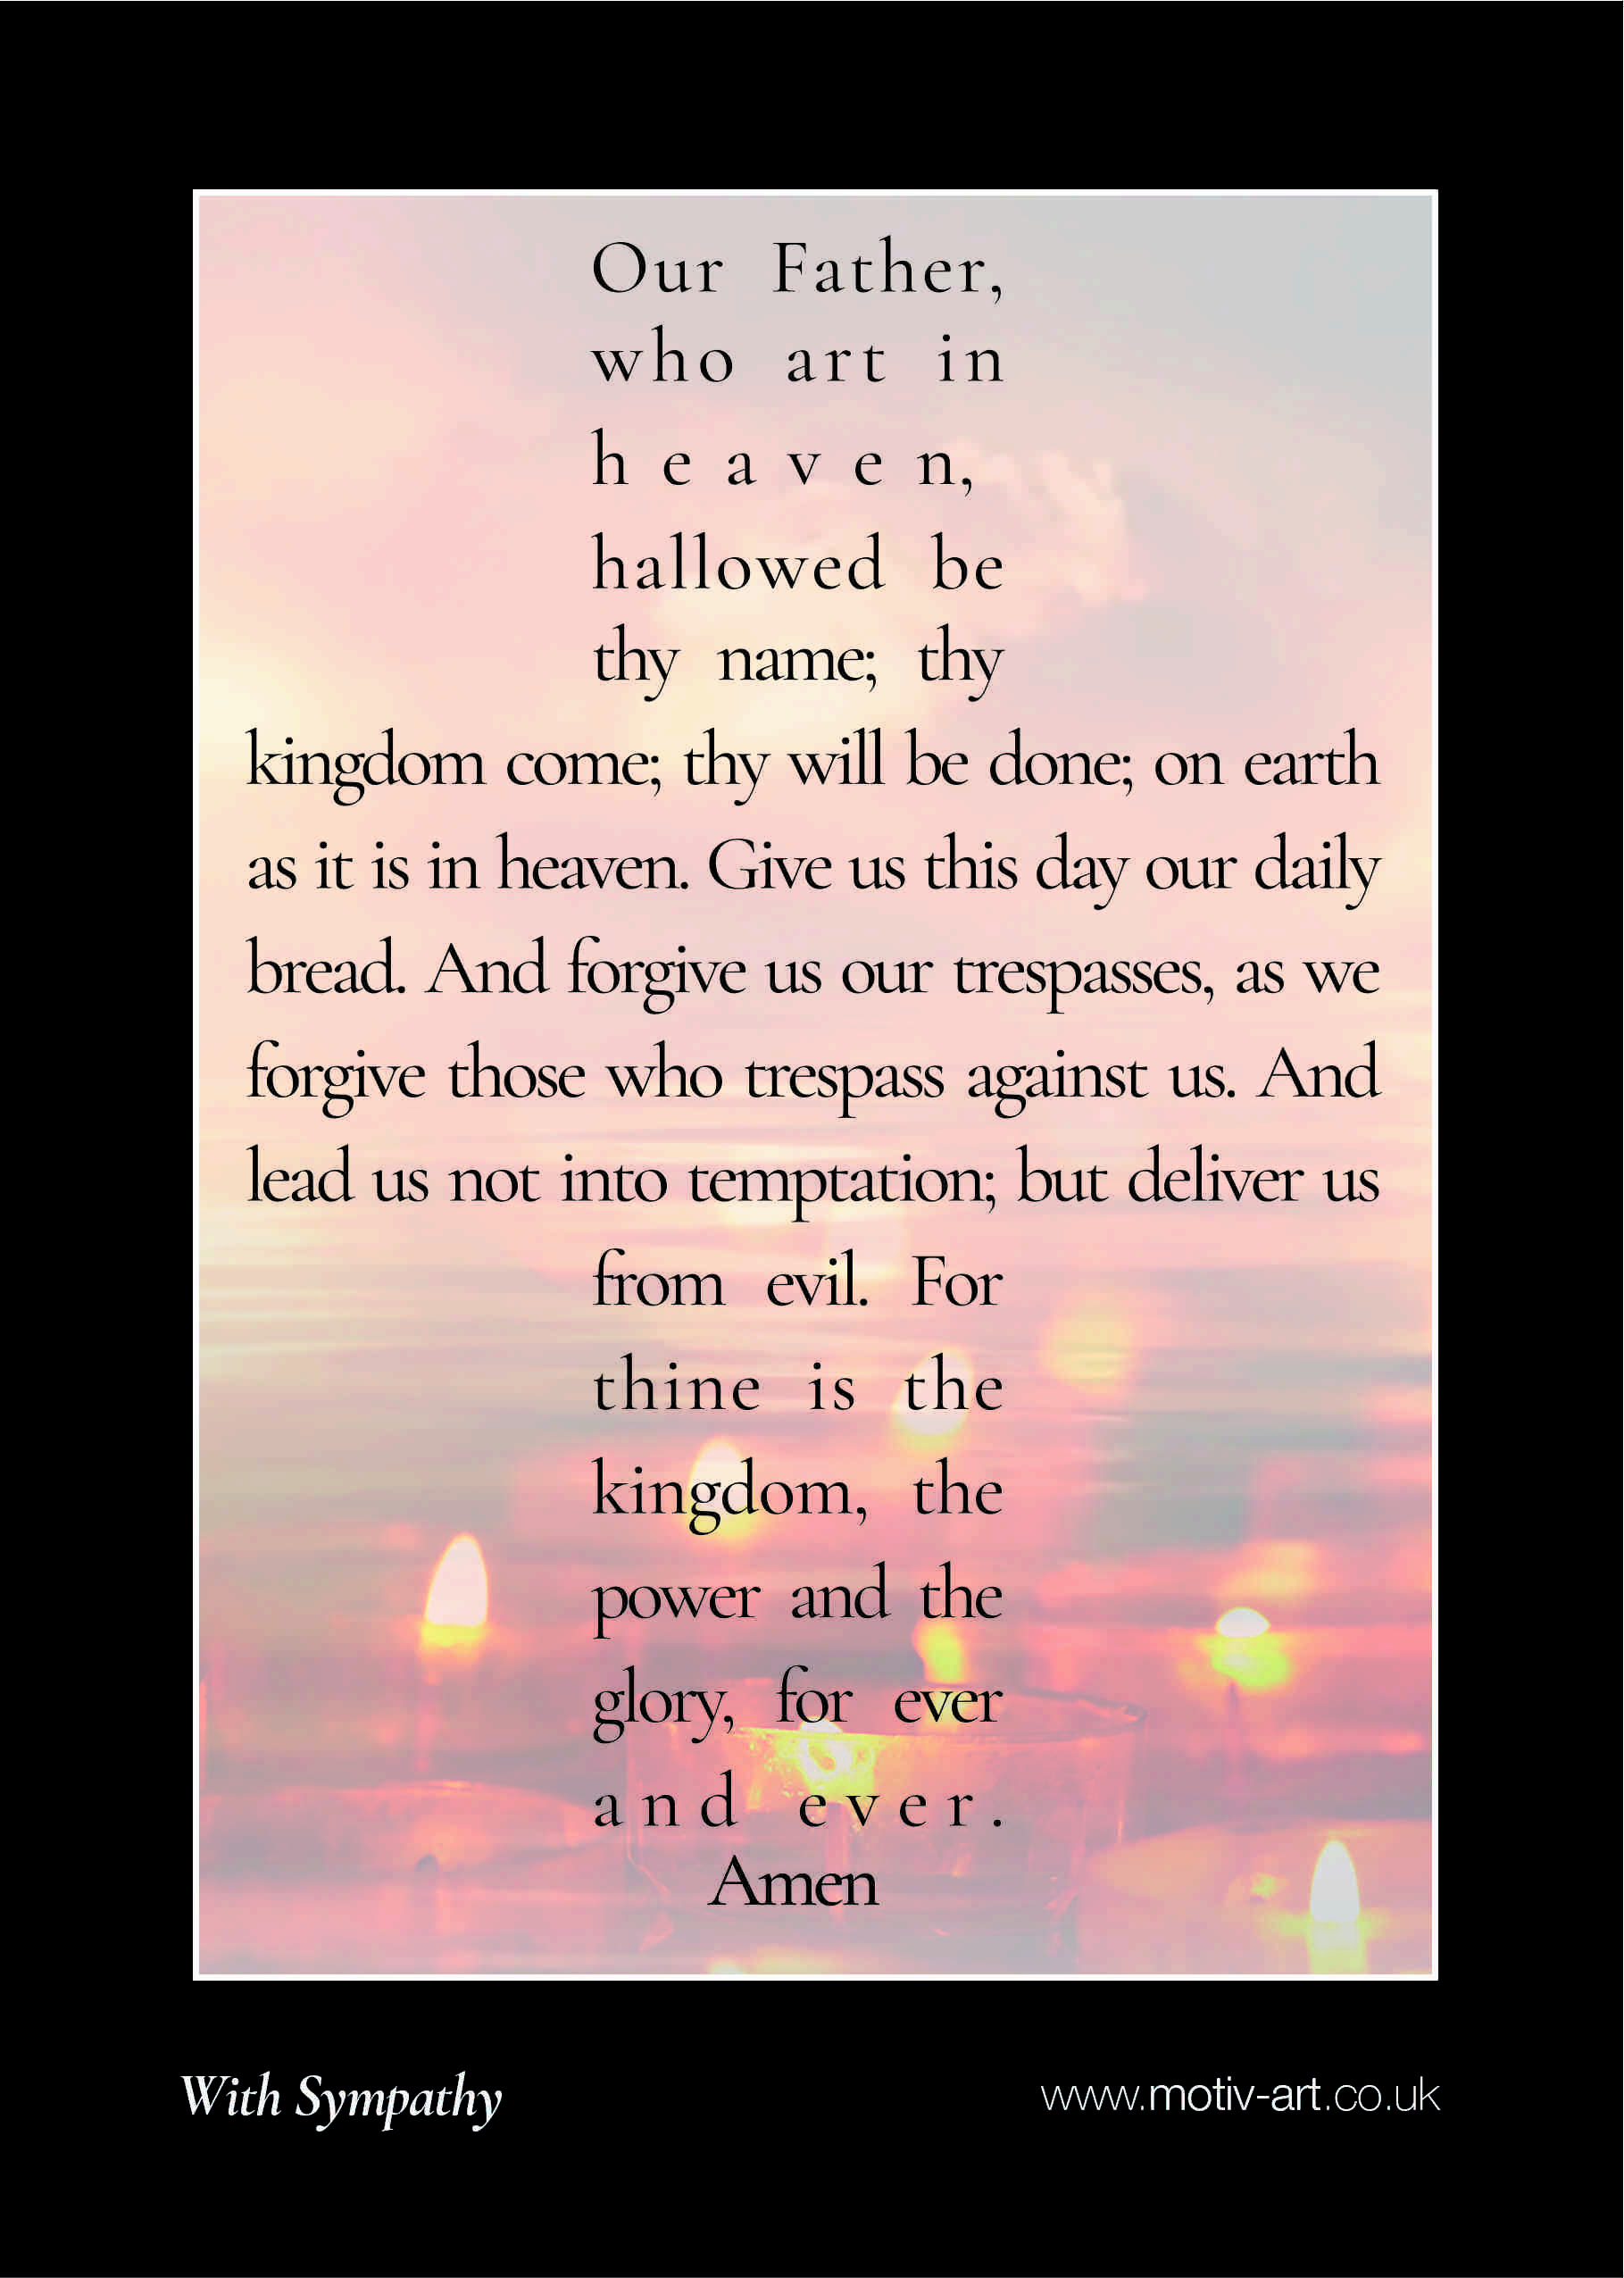 The Lord's prayer.